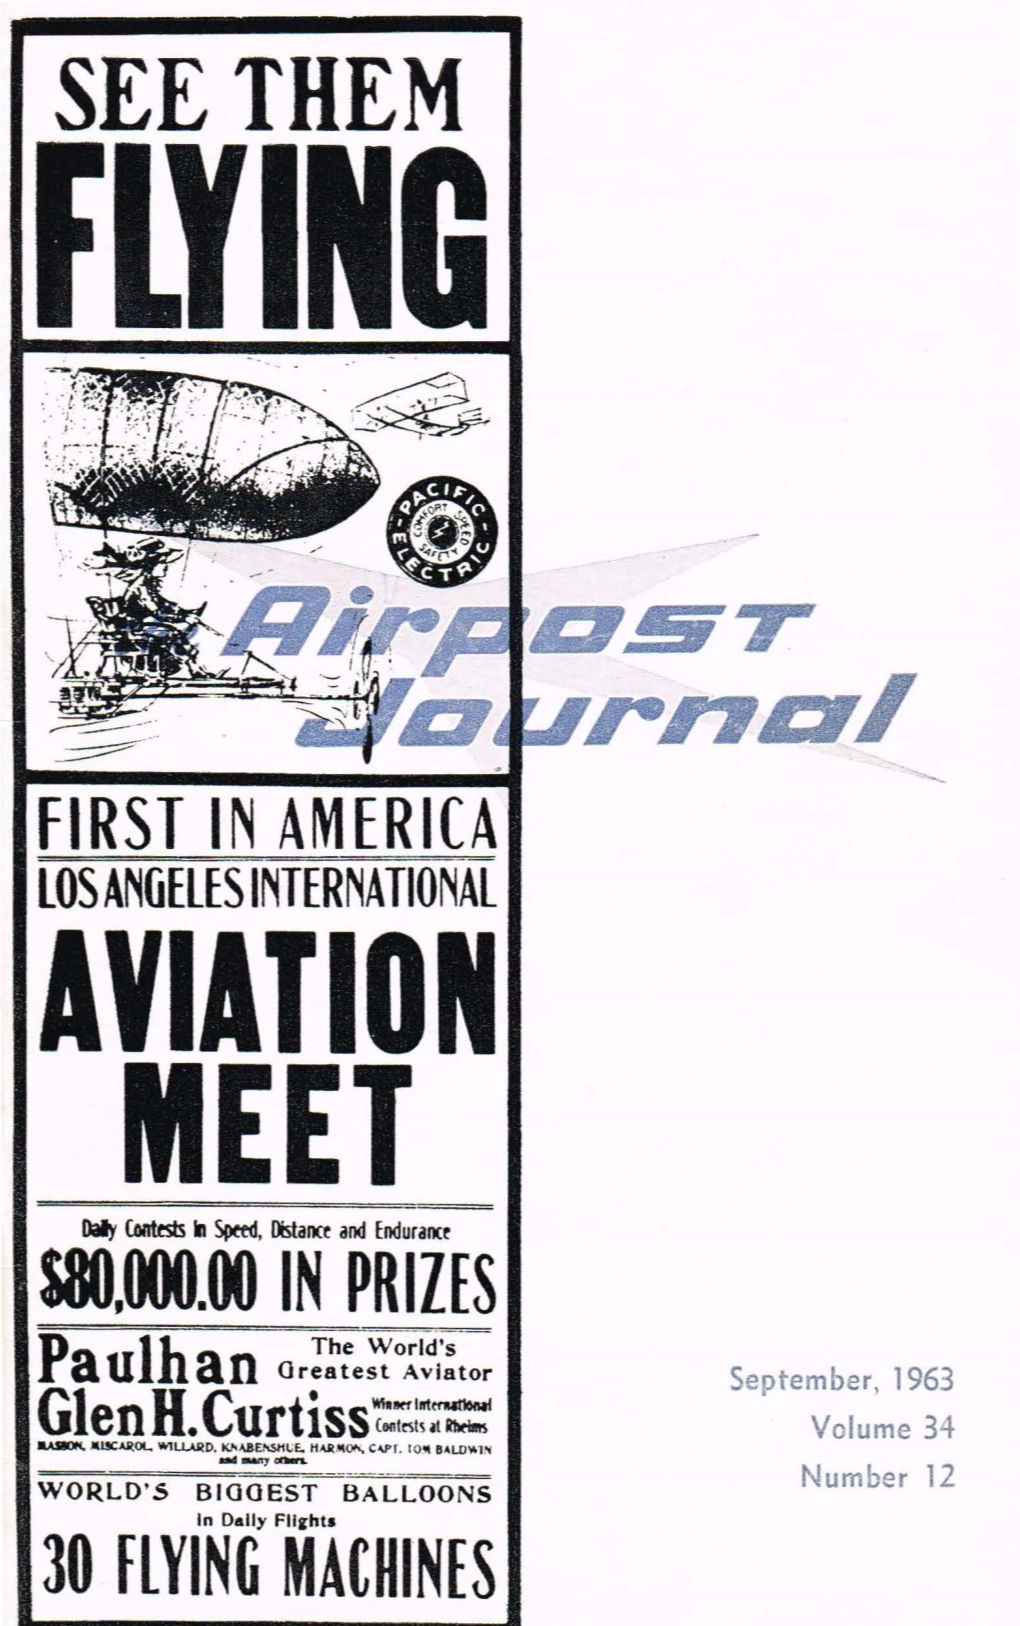 AVIATION MEET Daly Canttsts in Spttd, Llistanct and Enduranc~ $80,000.00 in PRIZES - - - the World's Pa Ulh an Greatest Aviator September, 1963 Glen H